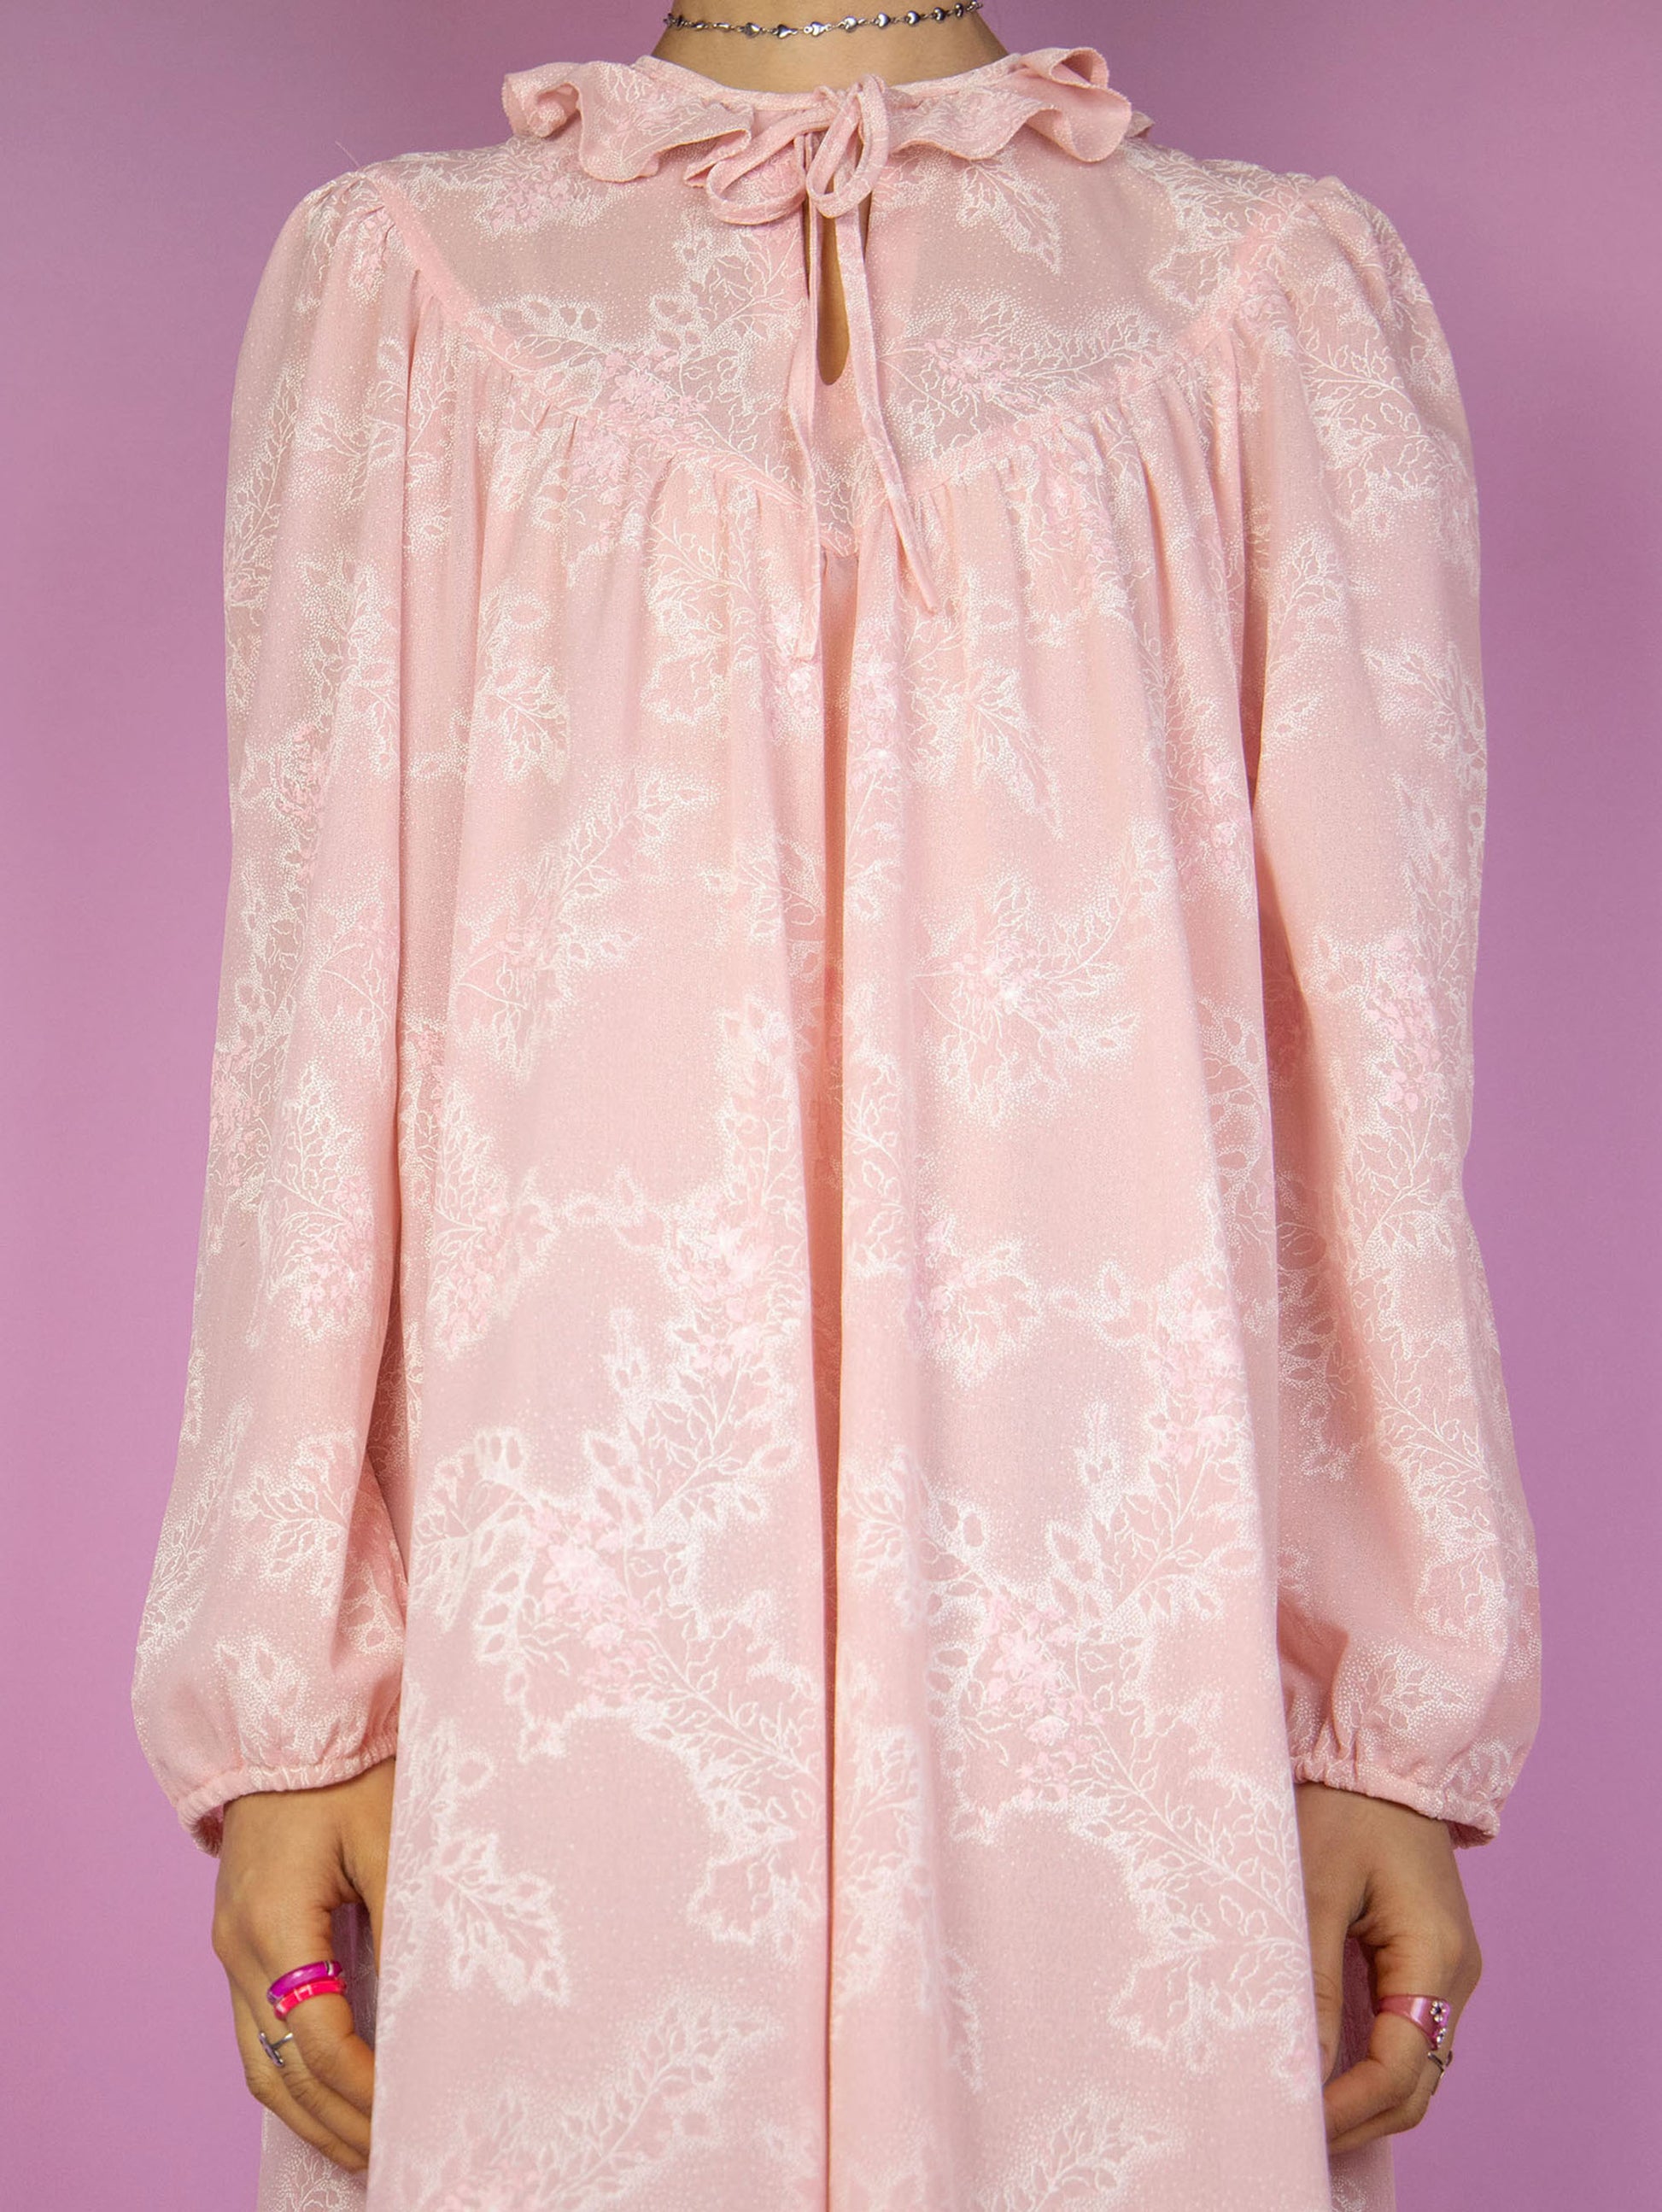 The Vintage 90s Pink Floral Nightgown Dress is a romantic cottagecore-inspired pastel pink puff sleeve midi night dress lounge sleepwear with a tied-up front ruffled neckline.